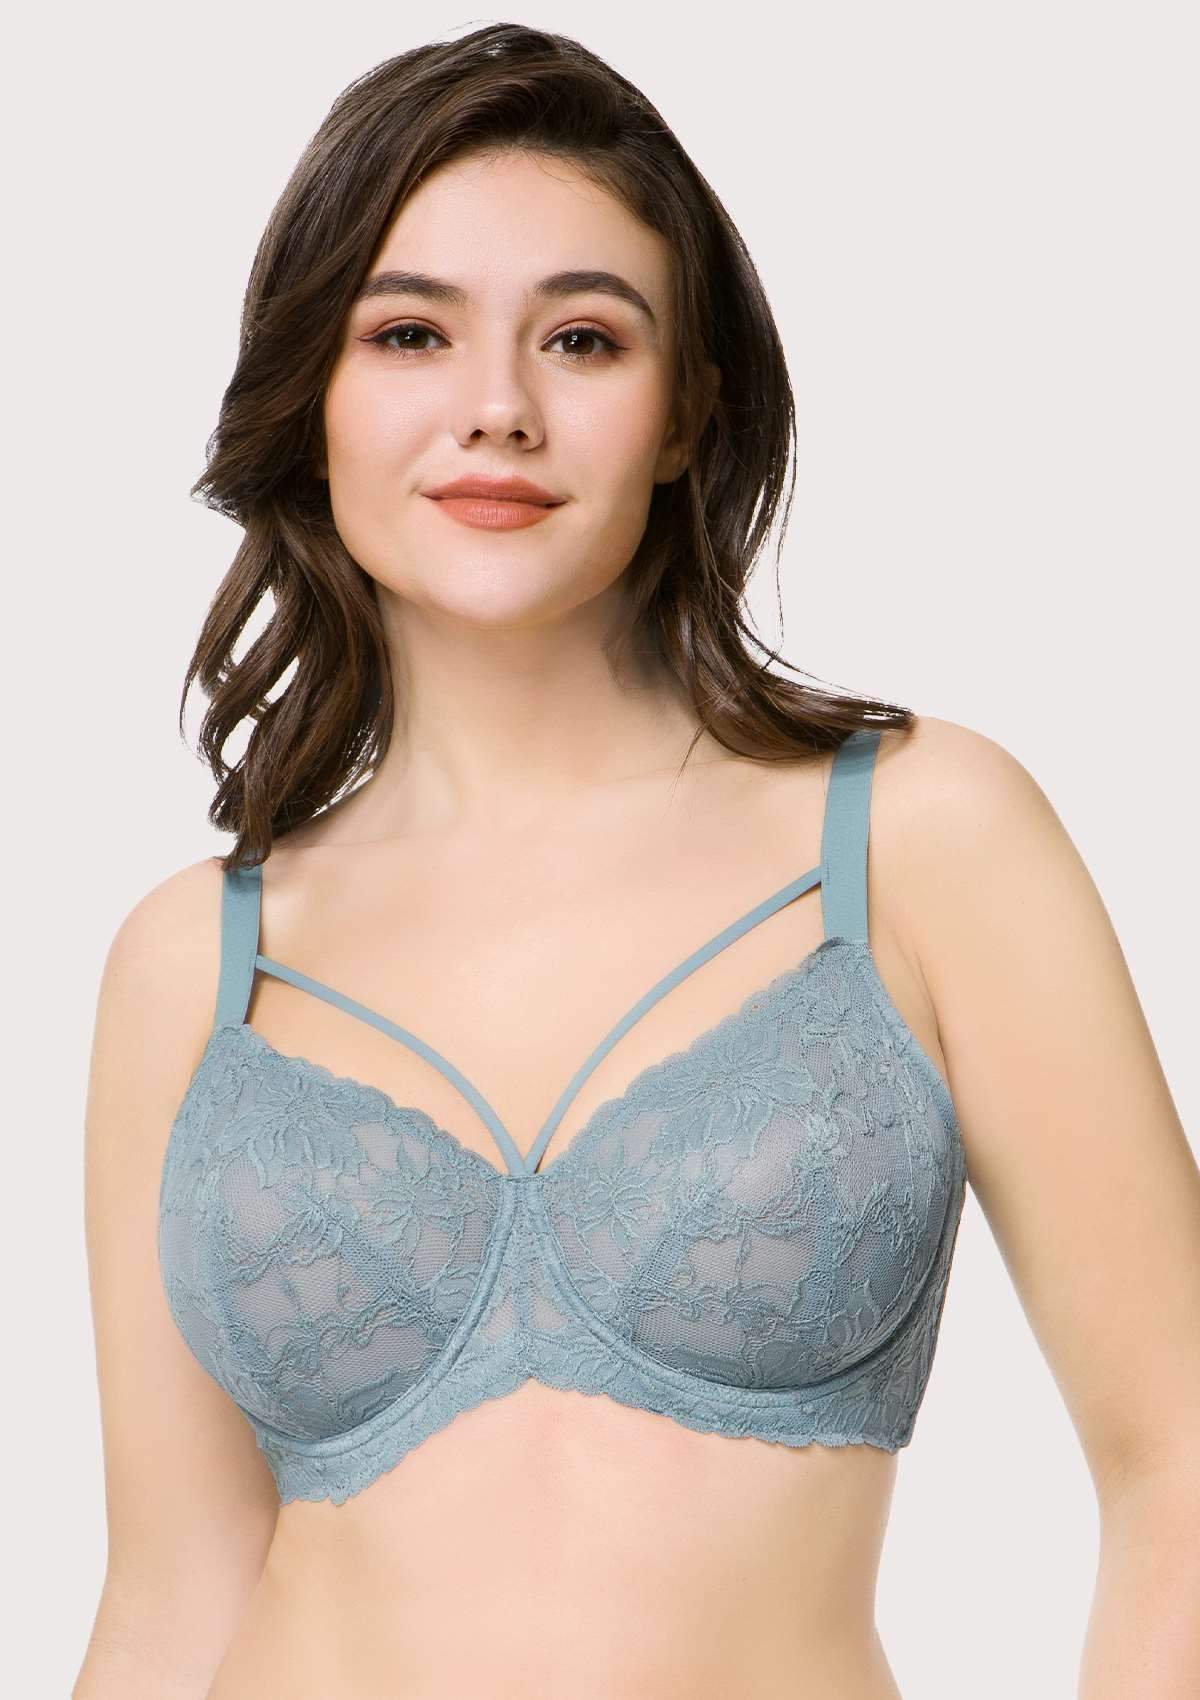 HSIA Pretty In Petals Unlined Lace Bra: Comfortable And Supportive Bra - Crystal Blue / 32 / D